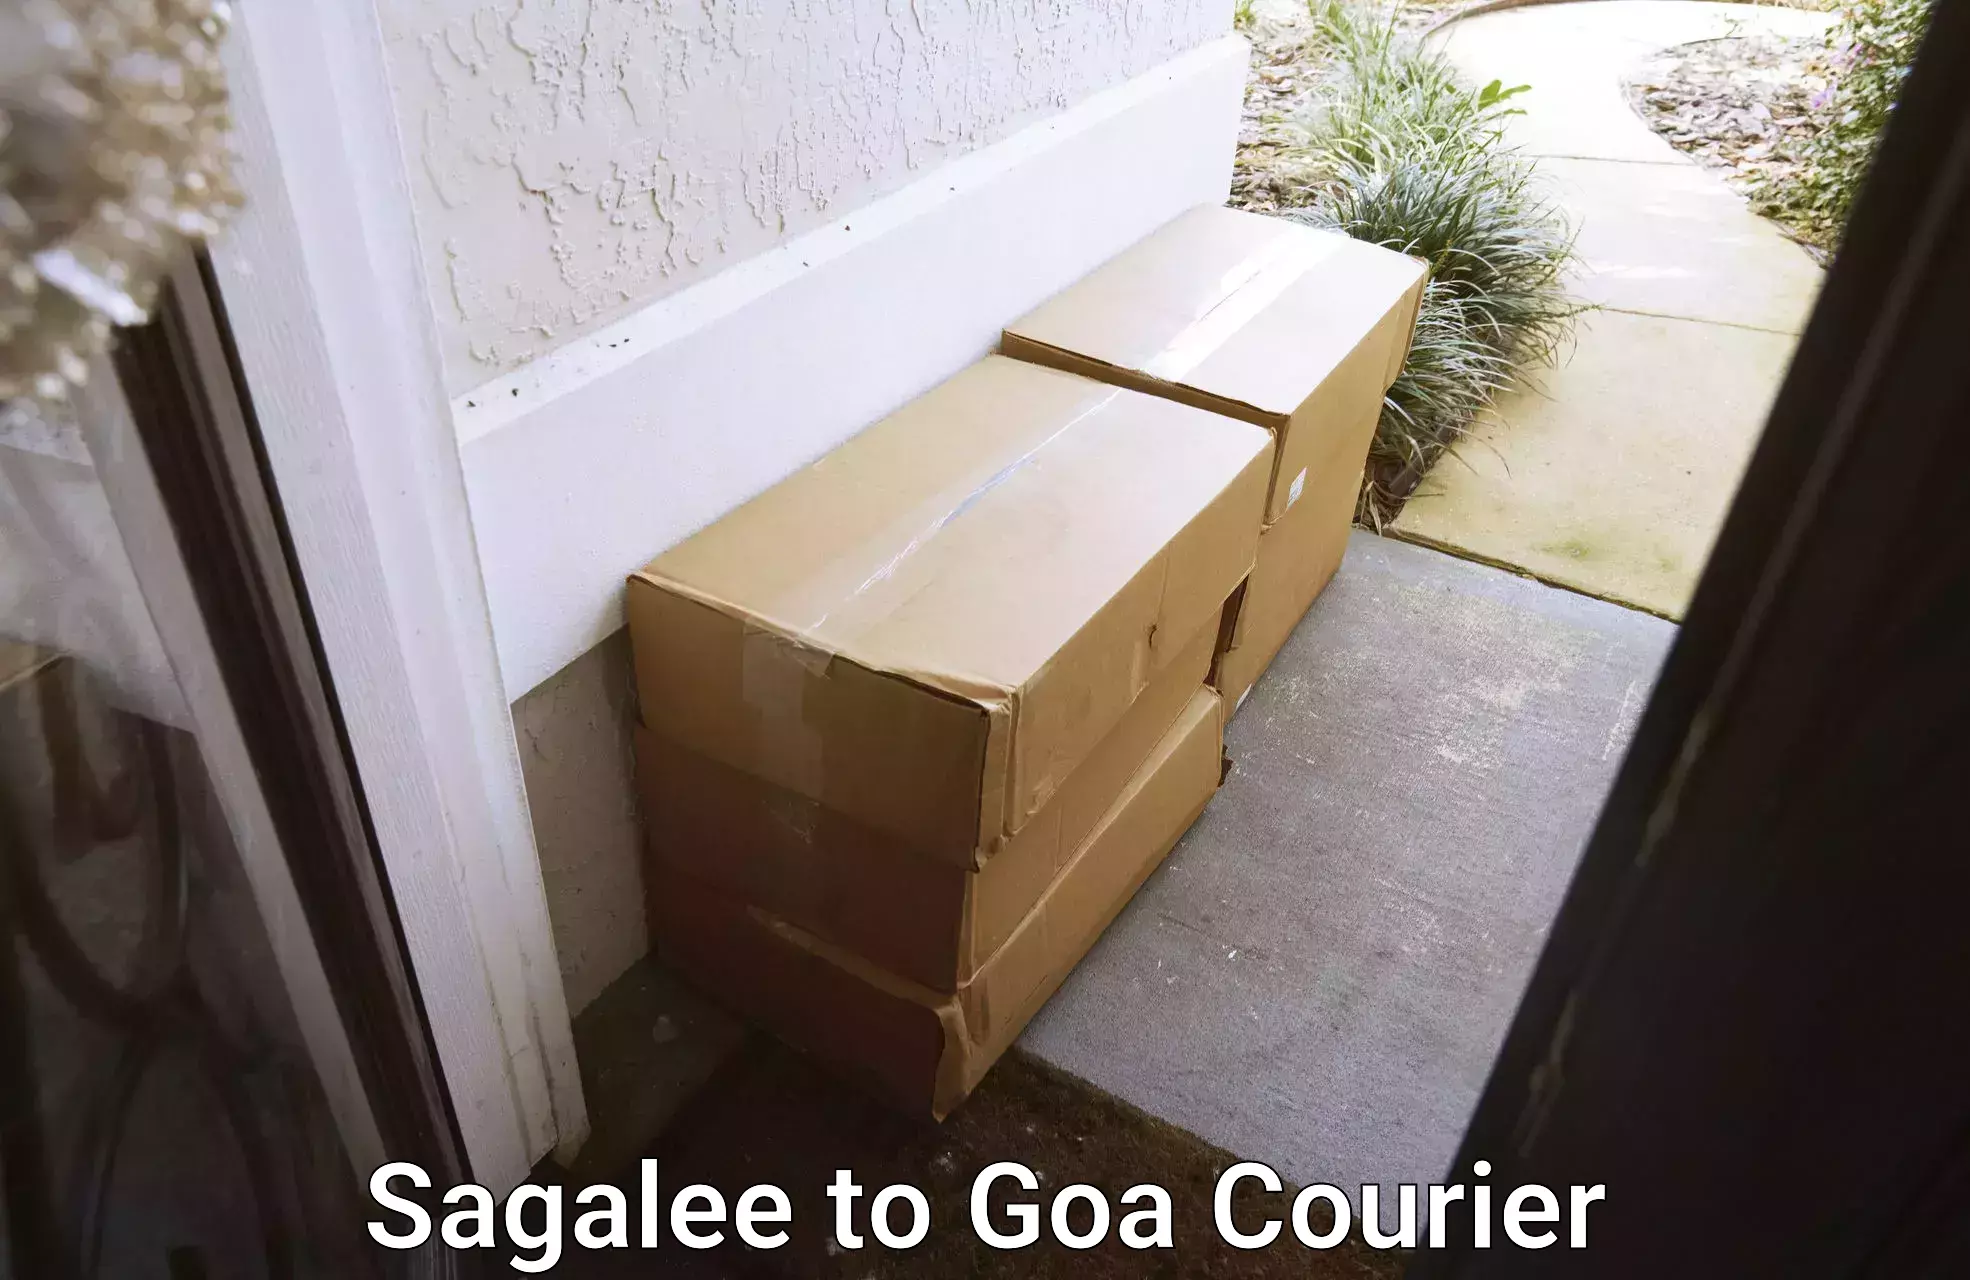 On-call courier service Sagalee to Goa